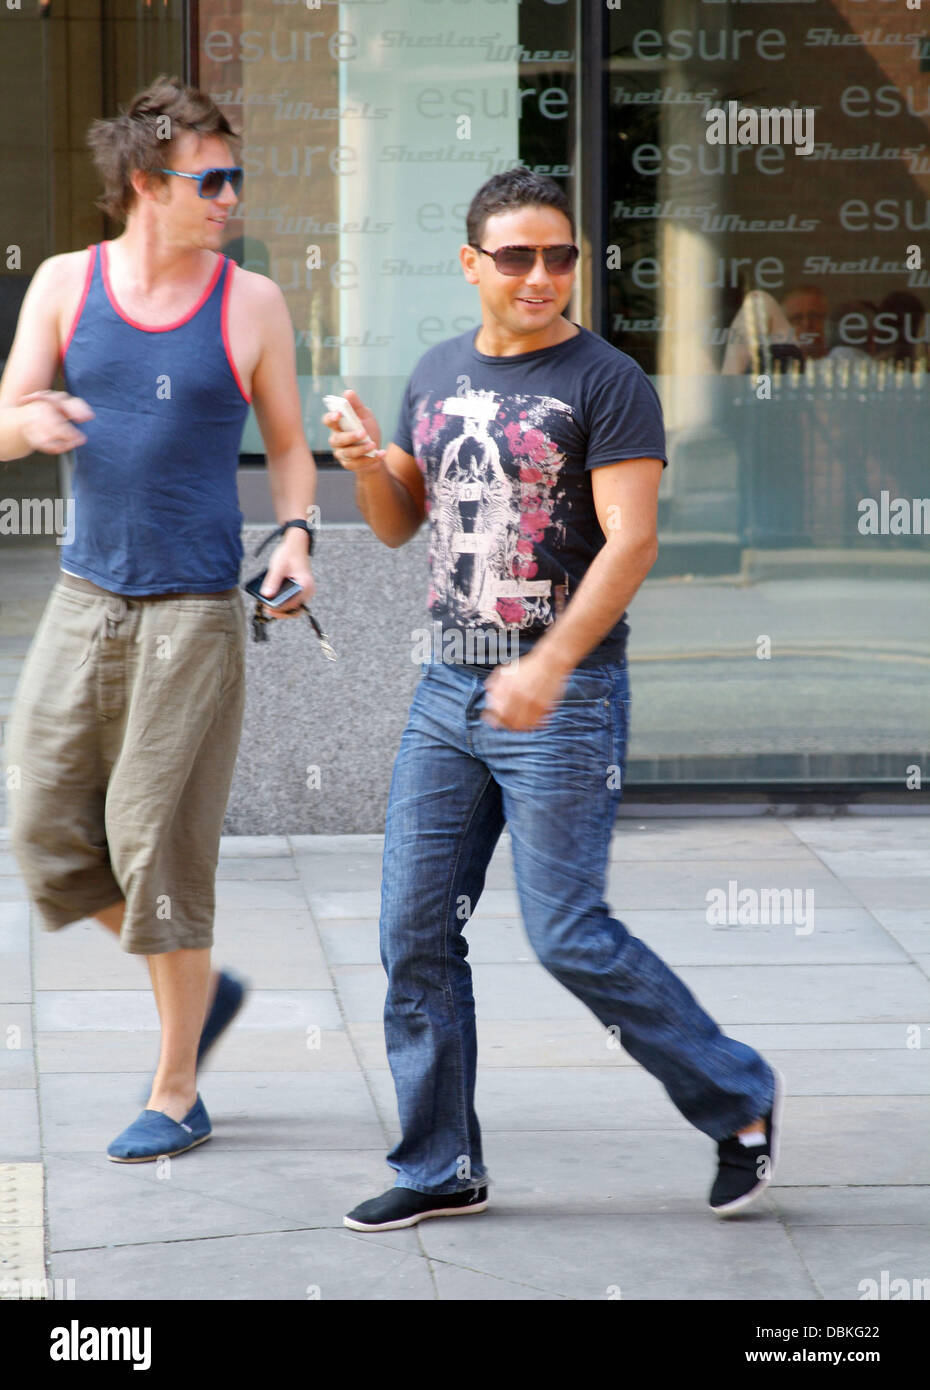 Coronation Street actor Ryan Thomas and Hollyoaks actor Andrew Moss go for coffee  Manchester, England - 04.07.11 Stock Photo